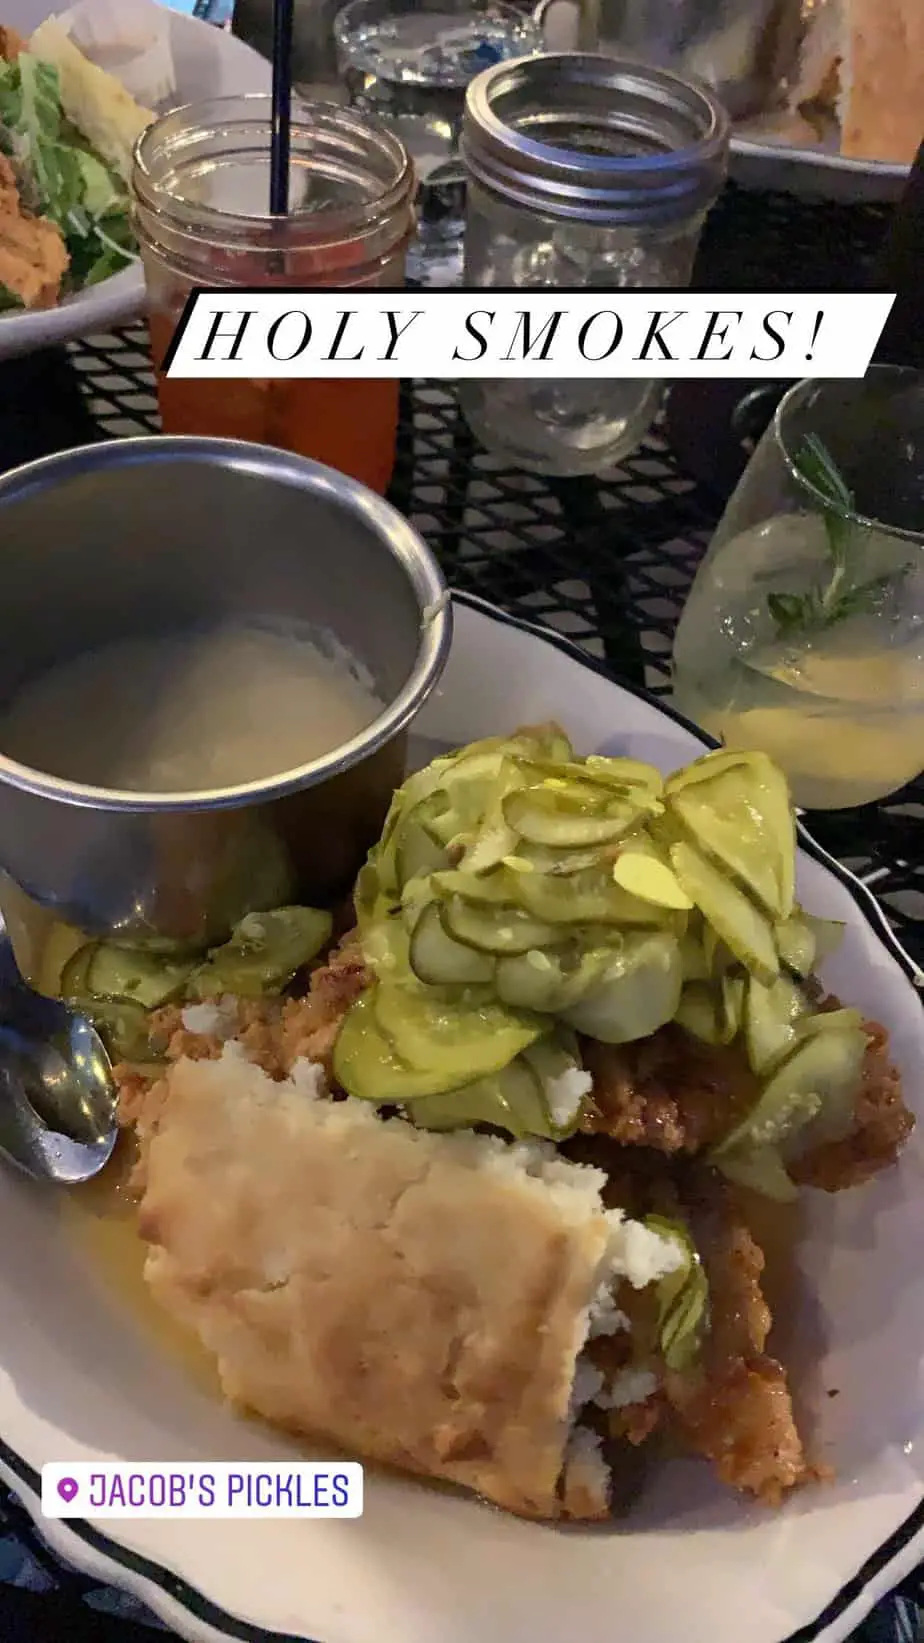 Biscuit and grits and pickles